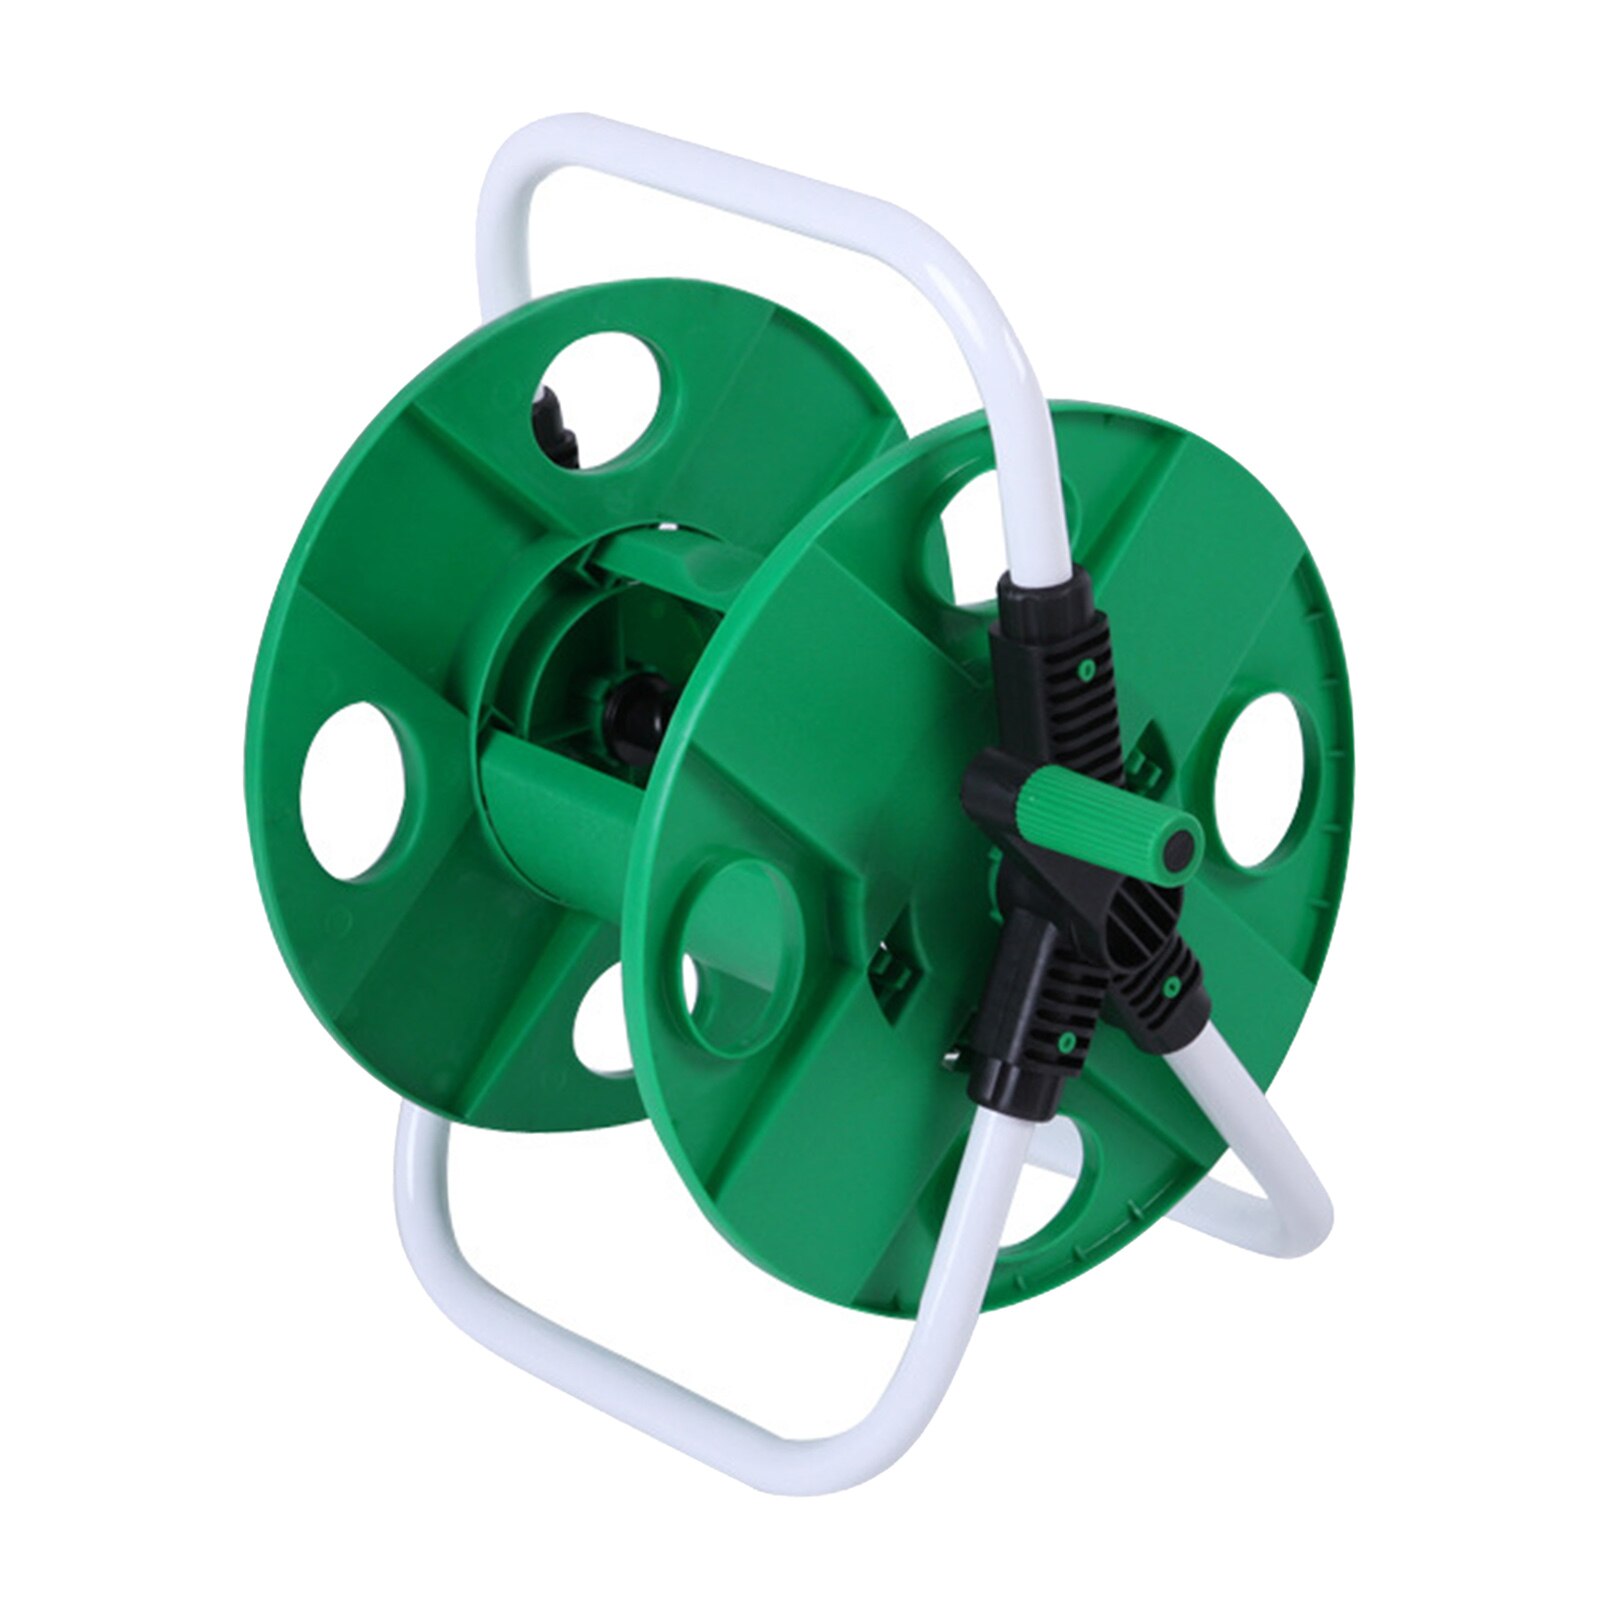 Garden Hose Pipe Reel Holder Cart Free Standing Home Greenhouse Outdoor Tools Accessory Save Space Water Irrigation Supplies